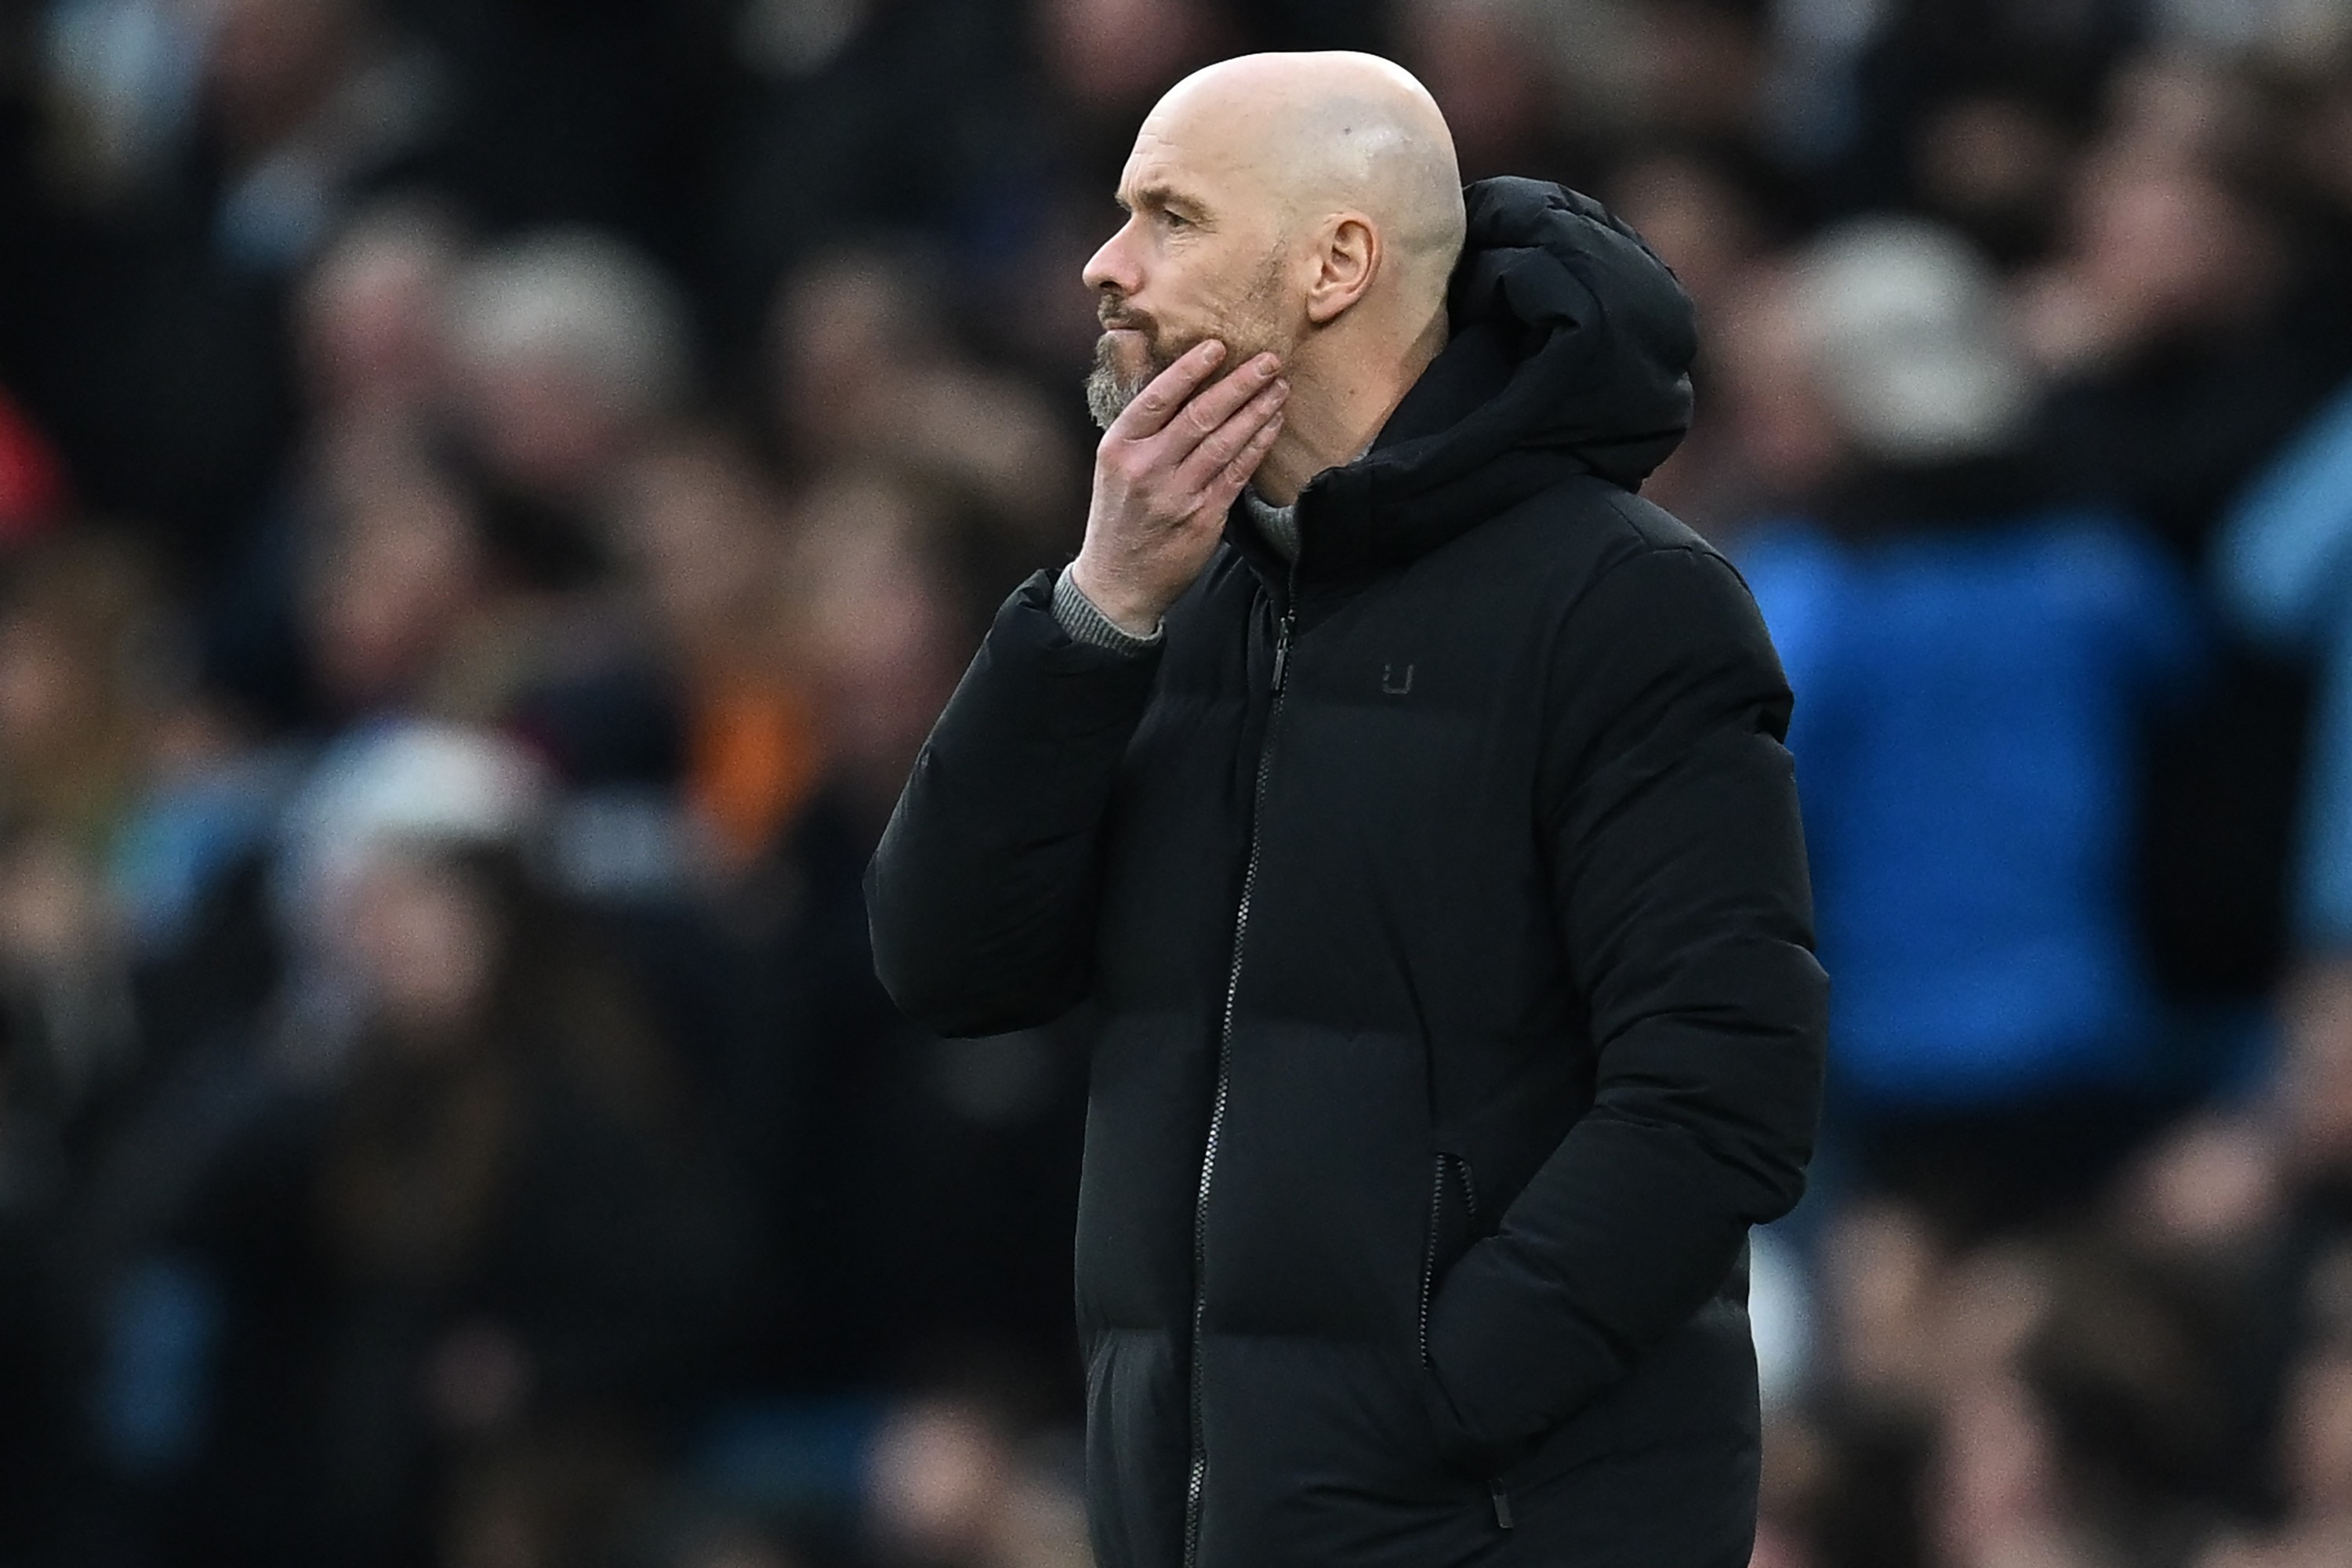 Gary Lineker and Micah Richards left stunned by admission from Erik ten Hag on Dutch television